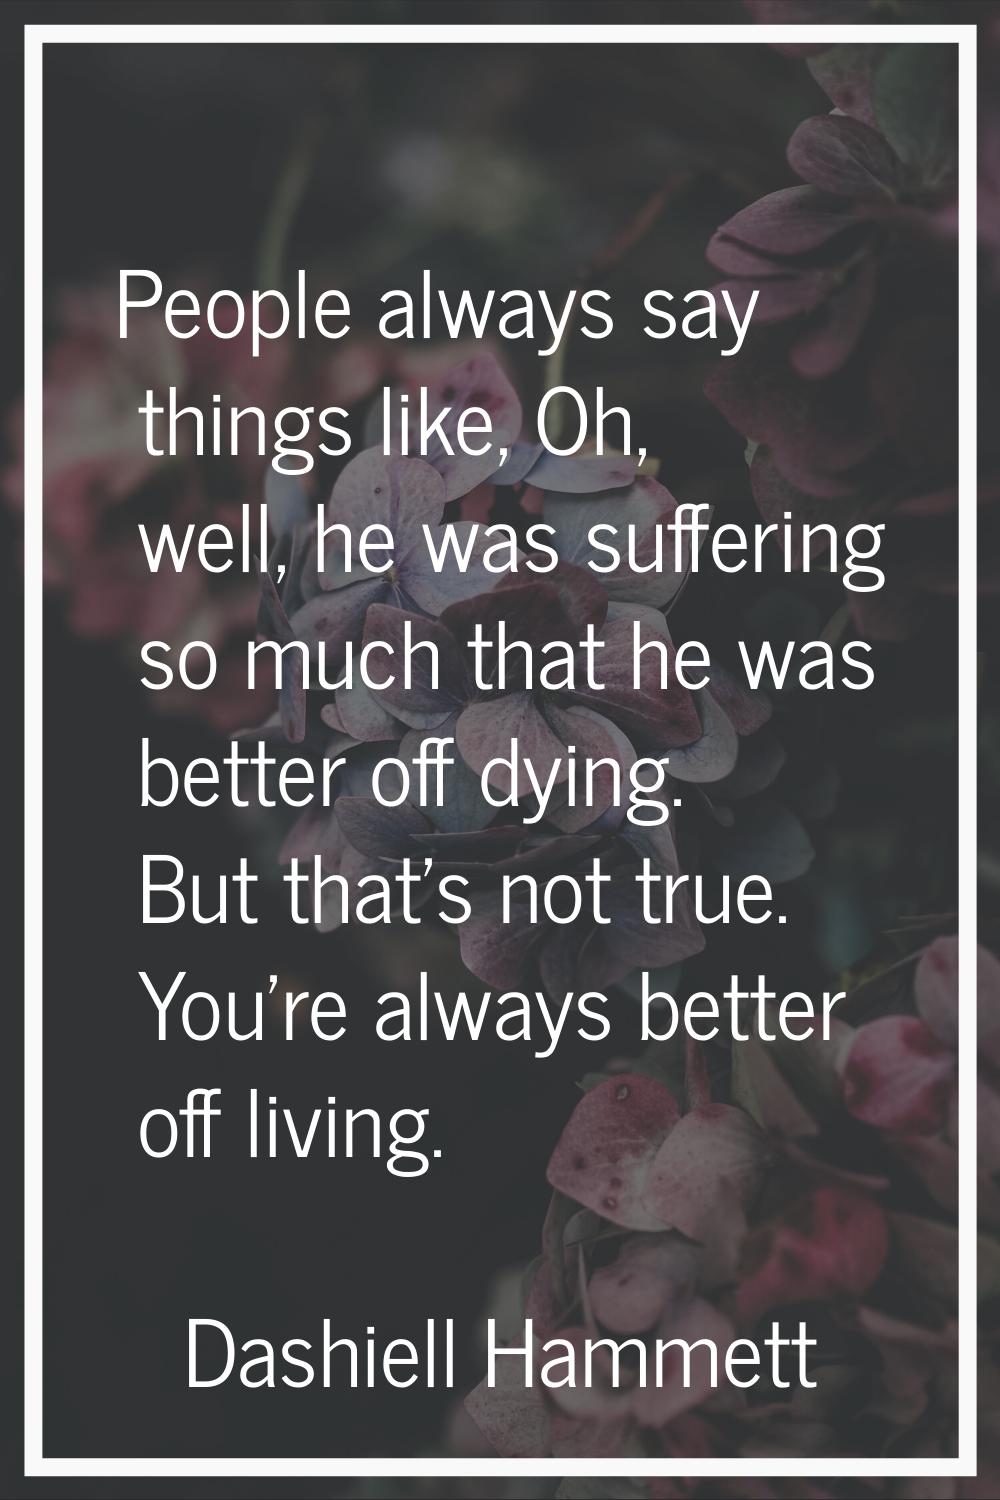 People always say things like, Oh, well, he was suffering so much that he was better off dying. But